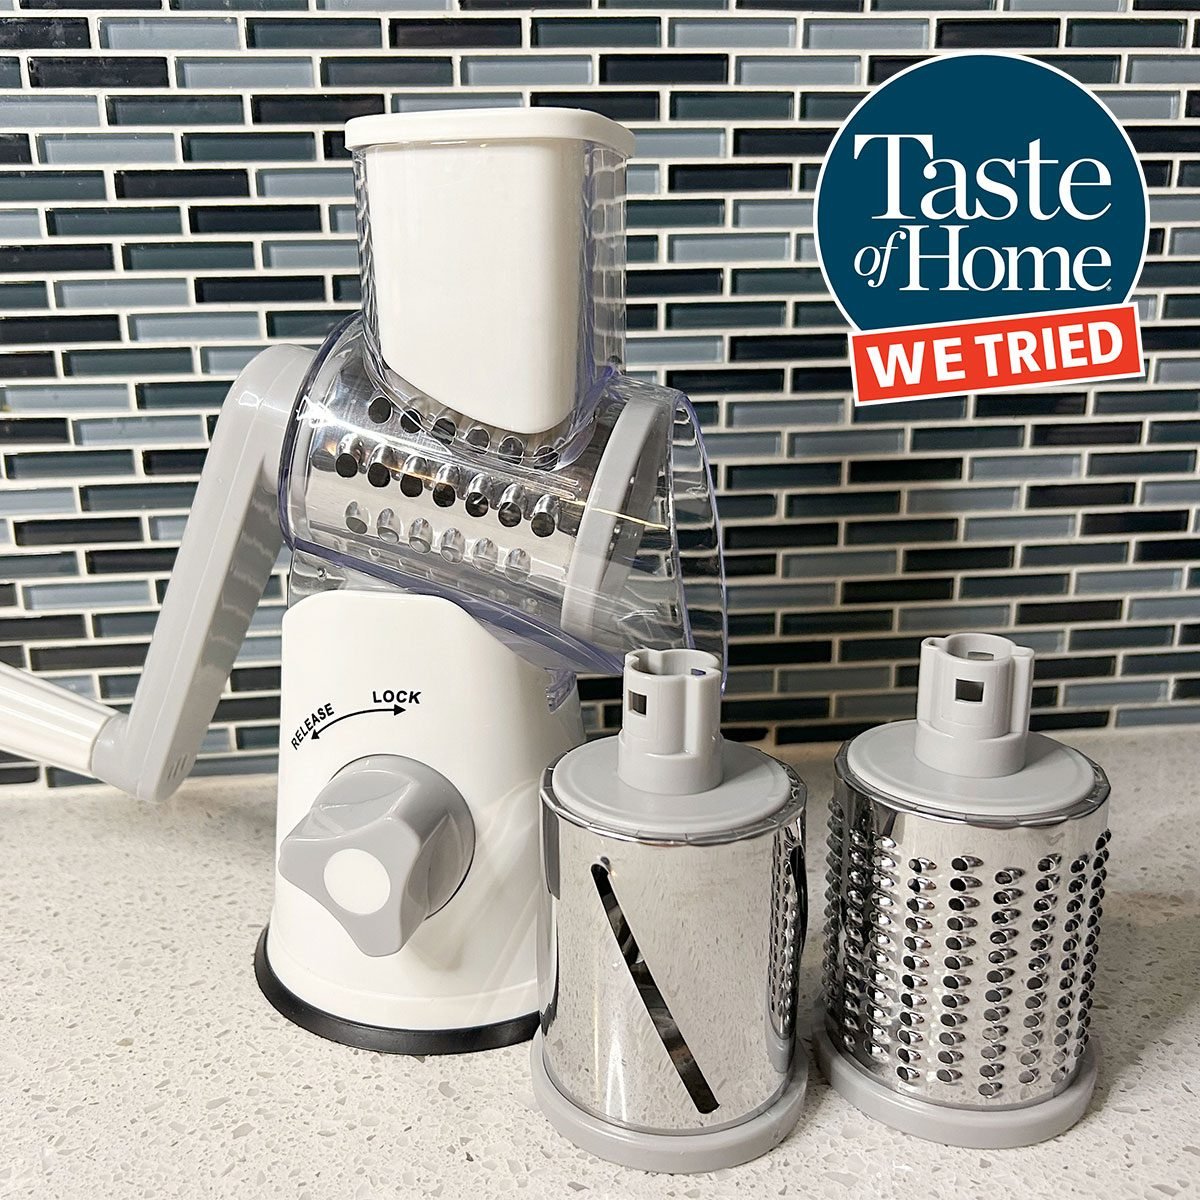 The Best Graters  America's Test Kitchen